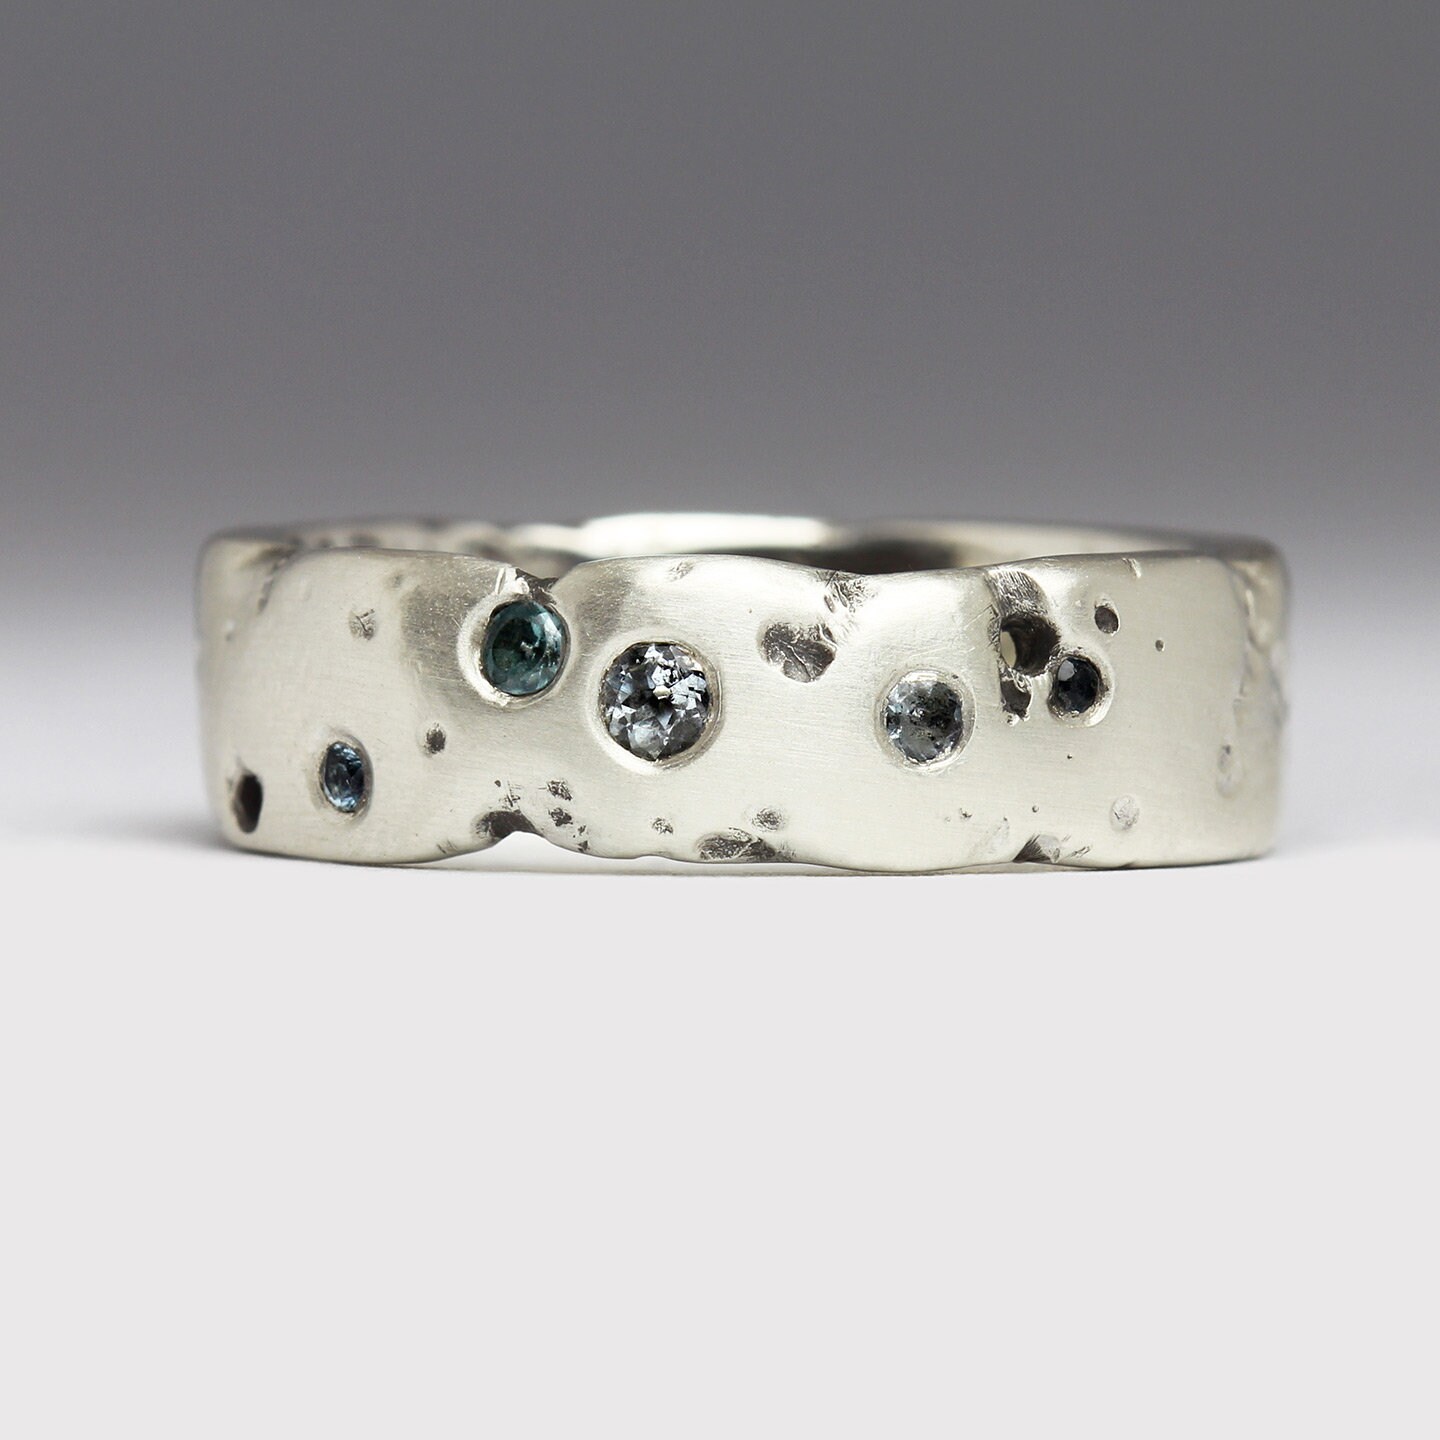 Silver & Gemstone Rockpool Ring - Recycled Rustic Textured Blue Gemstones Unique Design Handmade in Cornwall